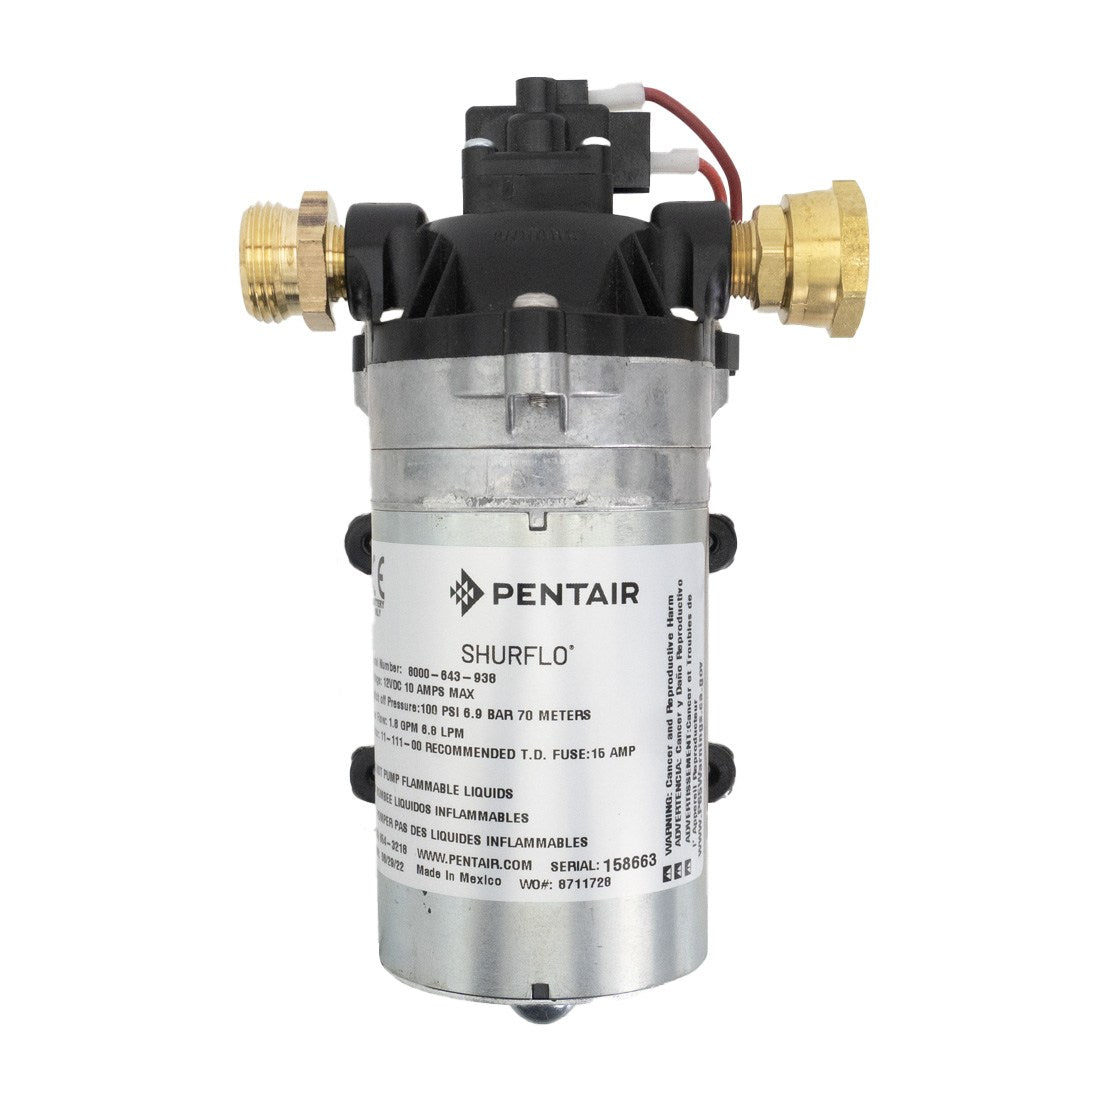 Pentair Shurflo Delivery Pump Product View